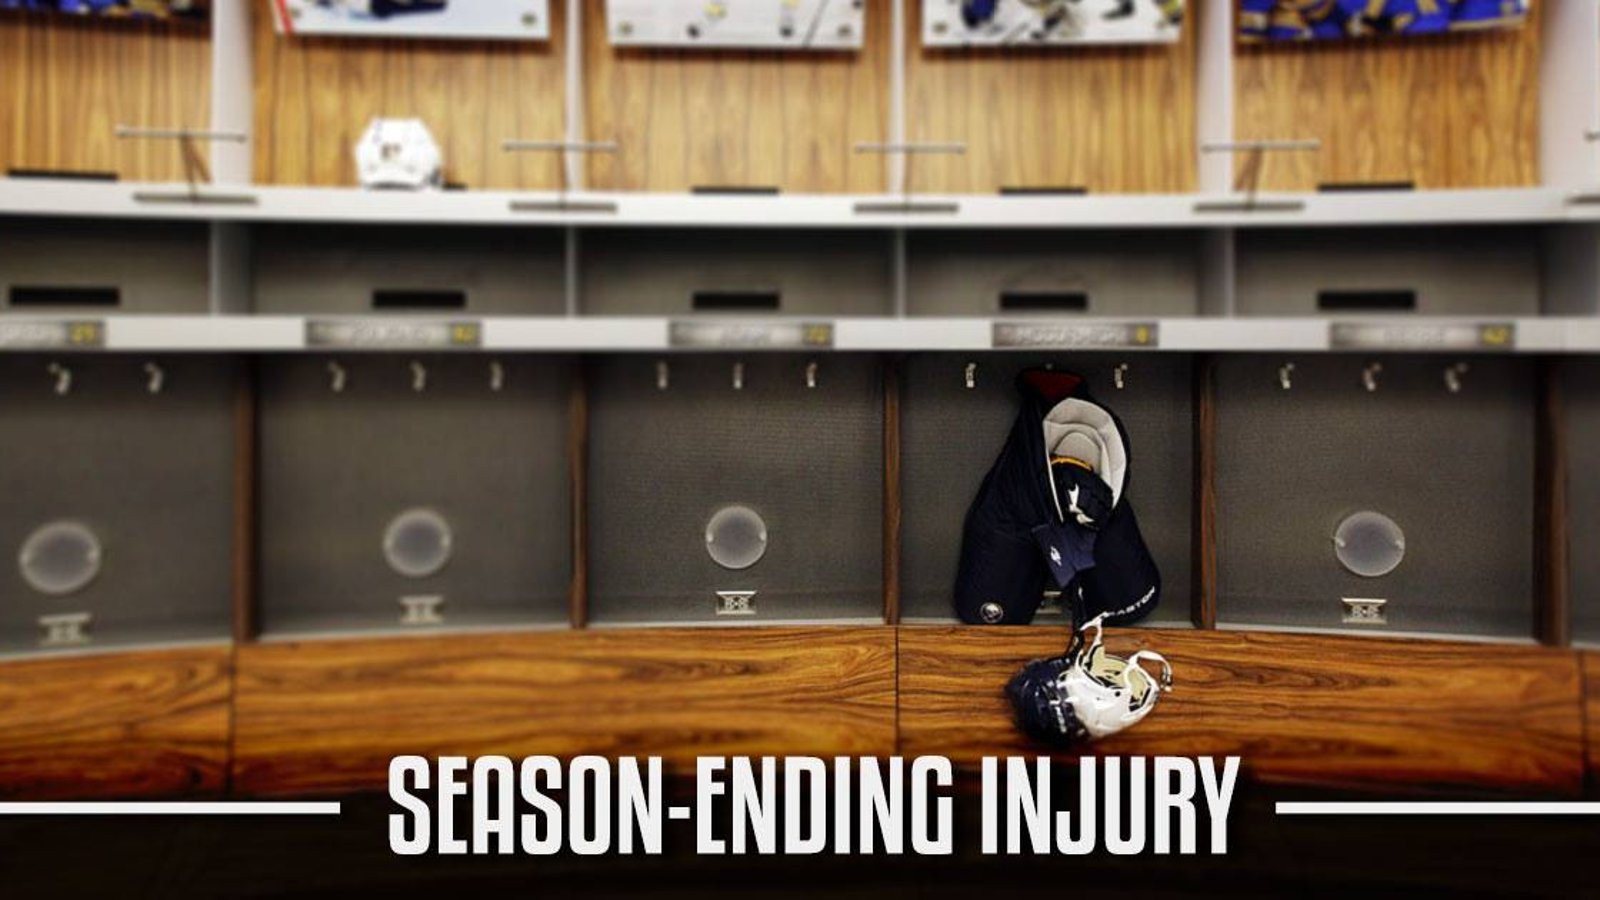 Breaking: Veteran forward is reportedly done for the season after suffering major injury.